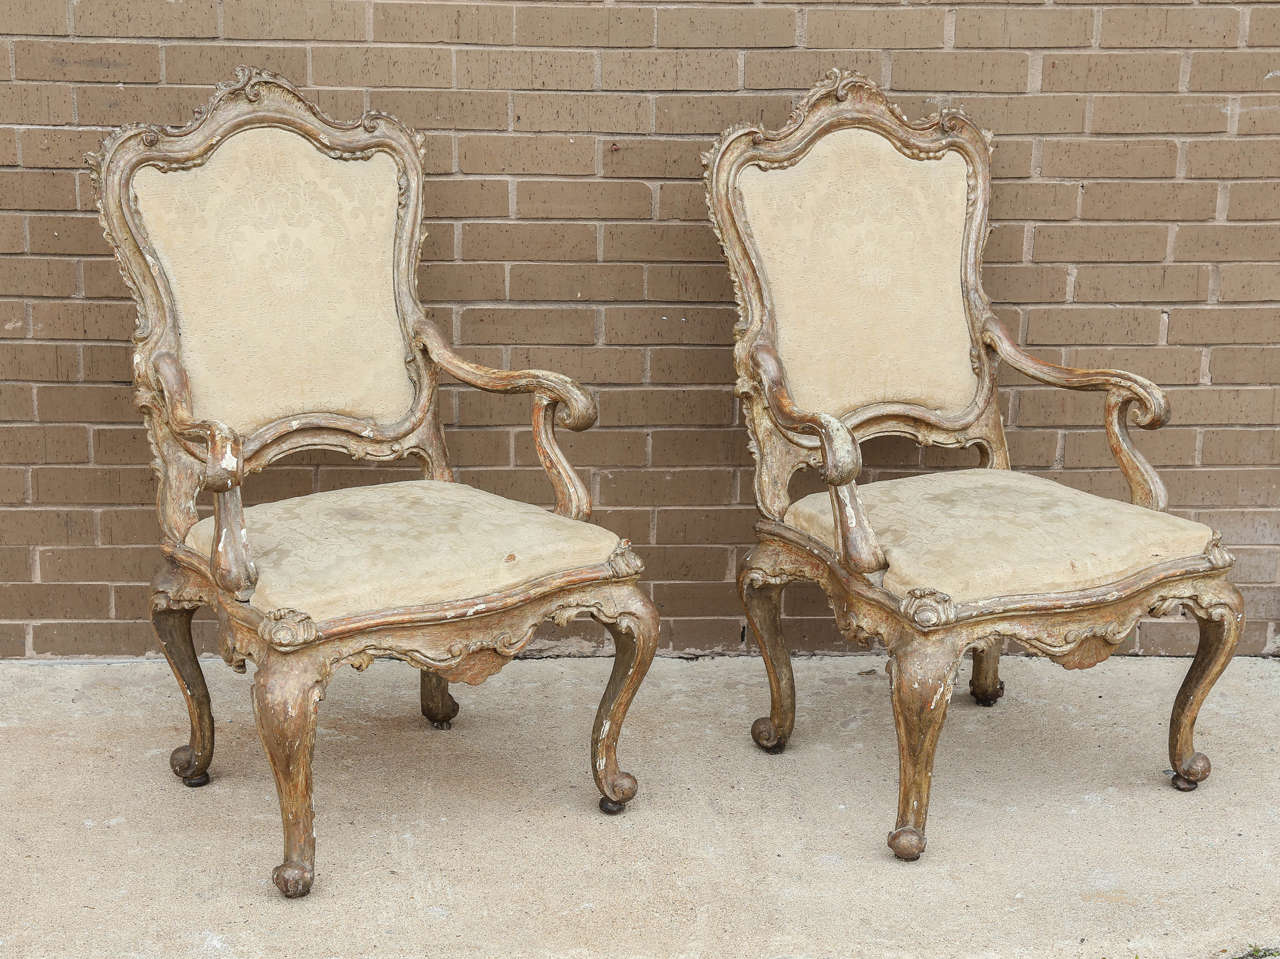 Wood carved armchairs from Napes, Italy, circa 1680. Very rare and has the antique fabric in good condition. Some parts appear gold leaf and others look silver.